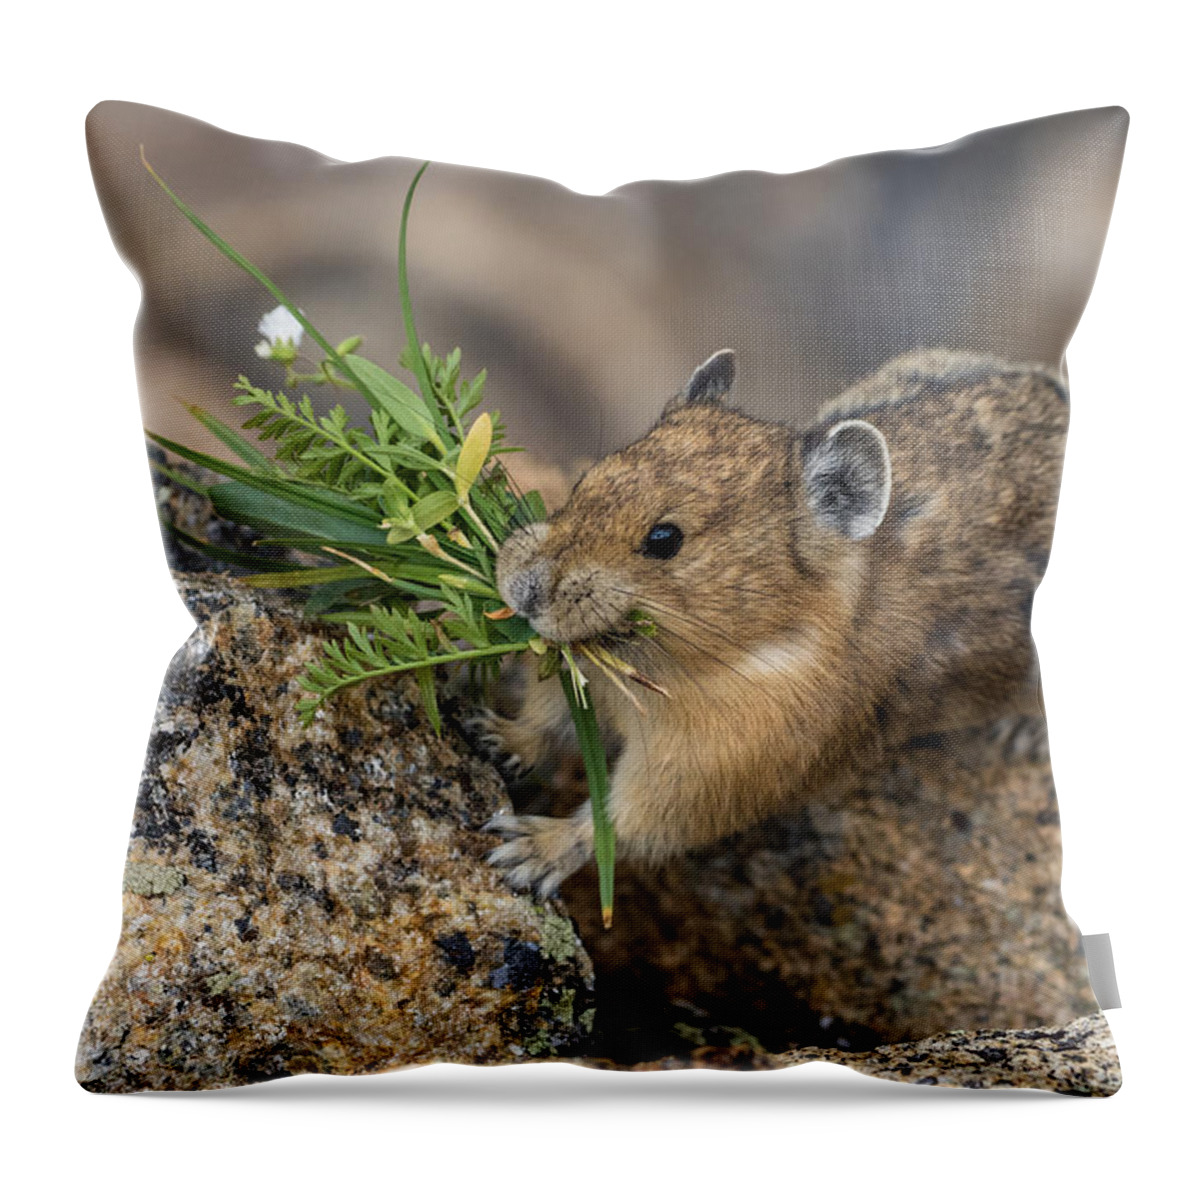 Pika Throw Pillow featuring the photograph Flowers For You by Mindy Musick King